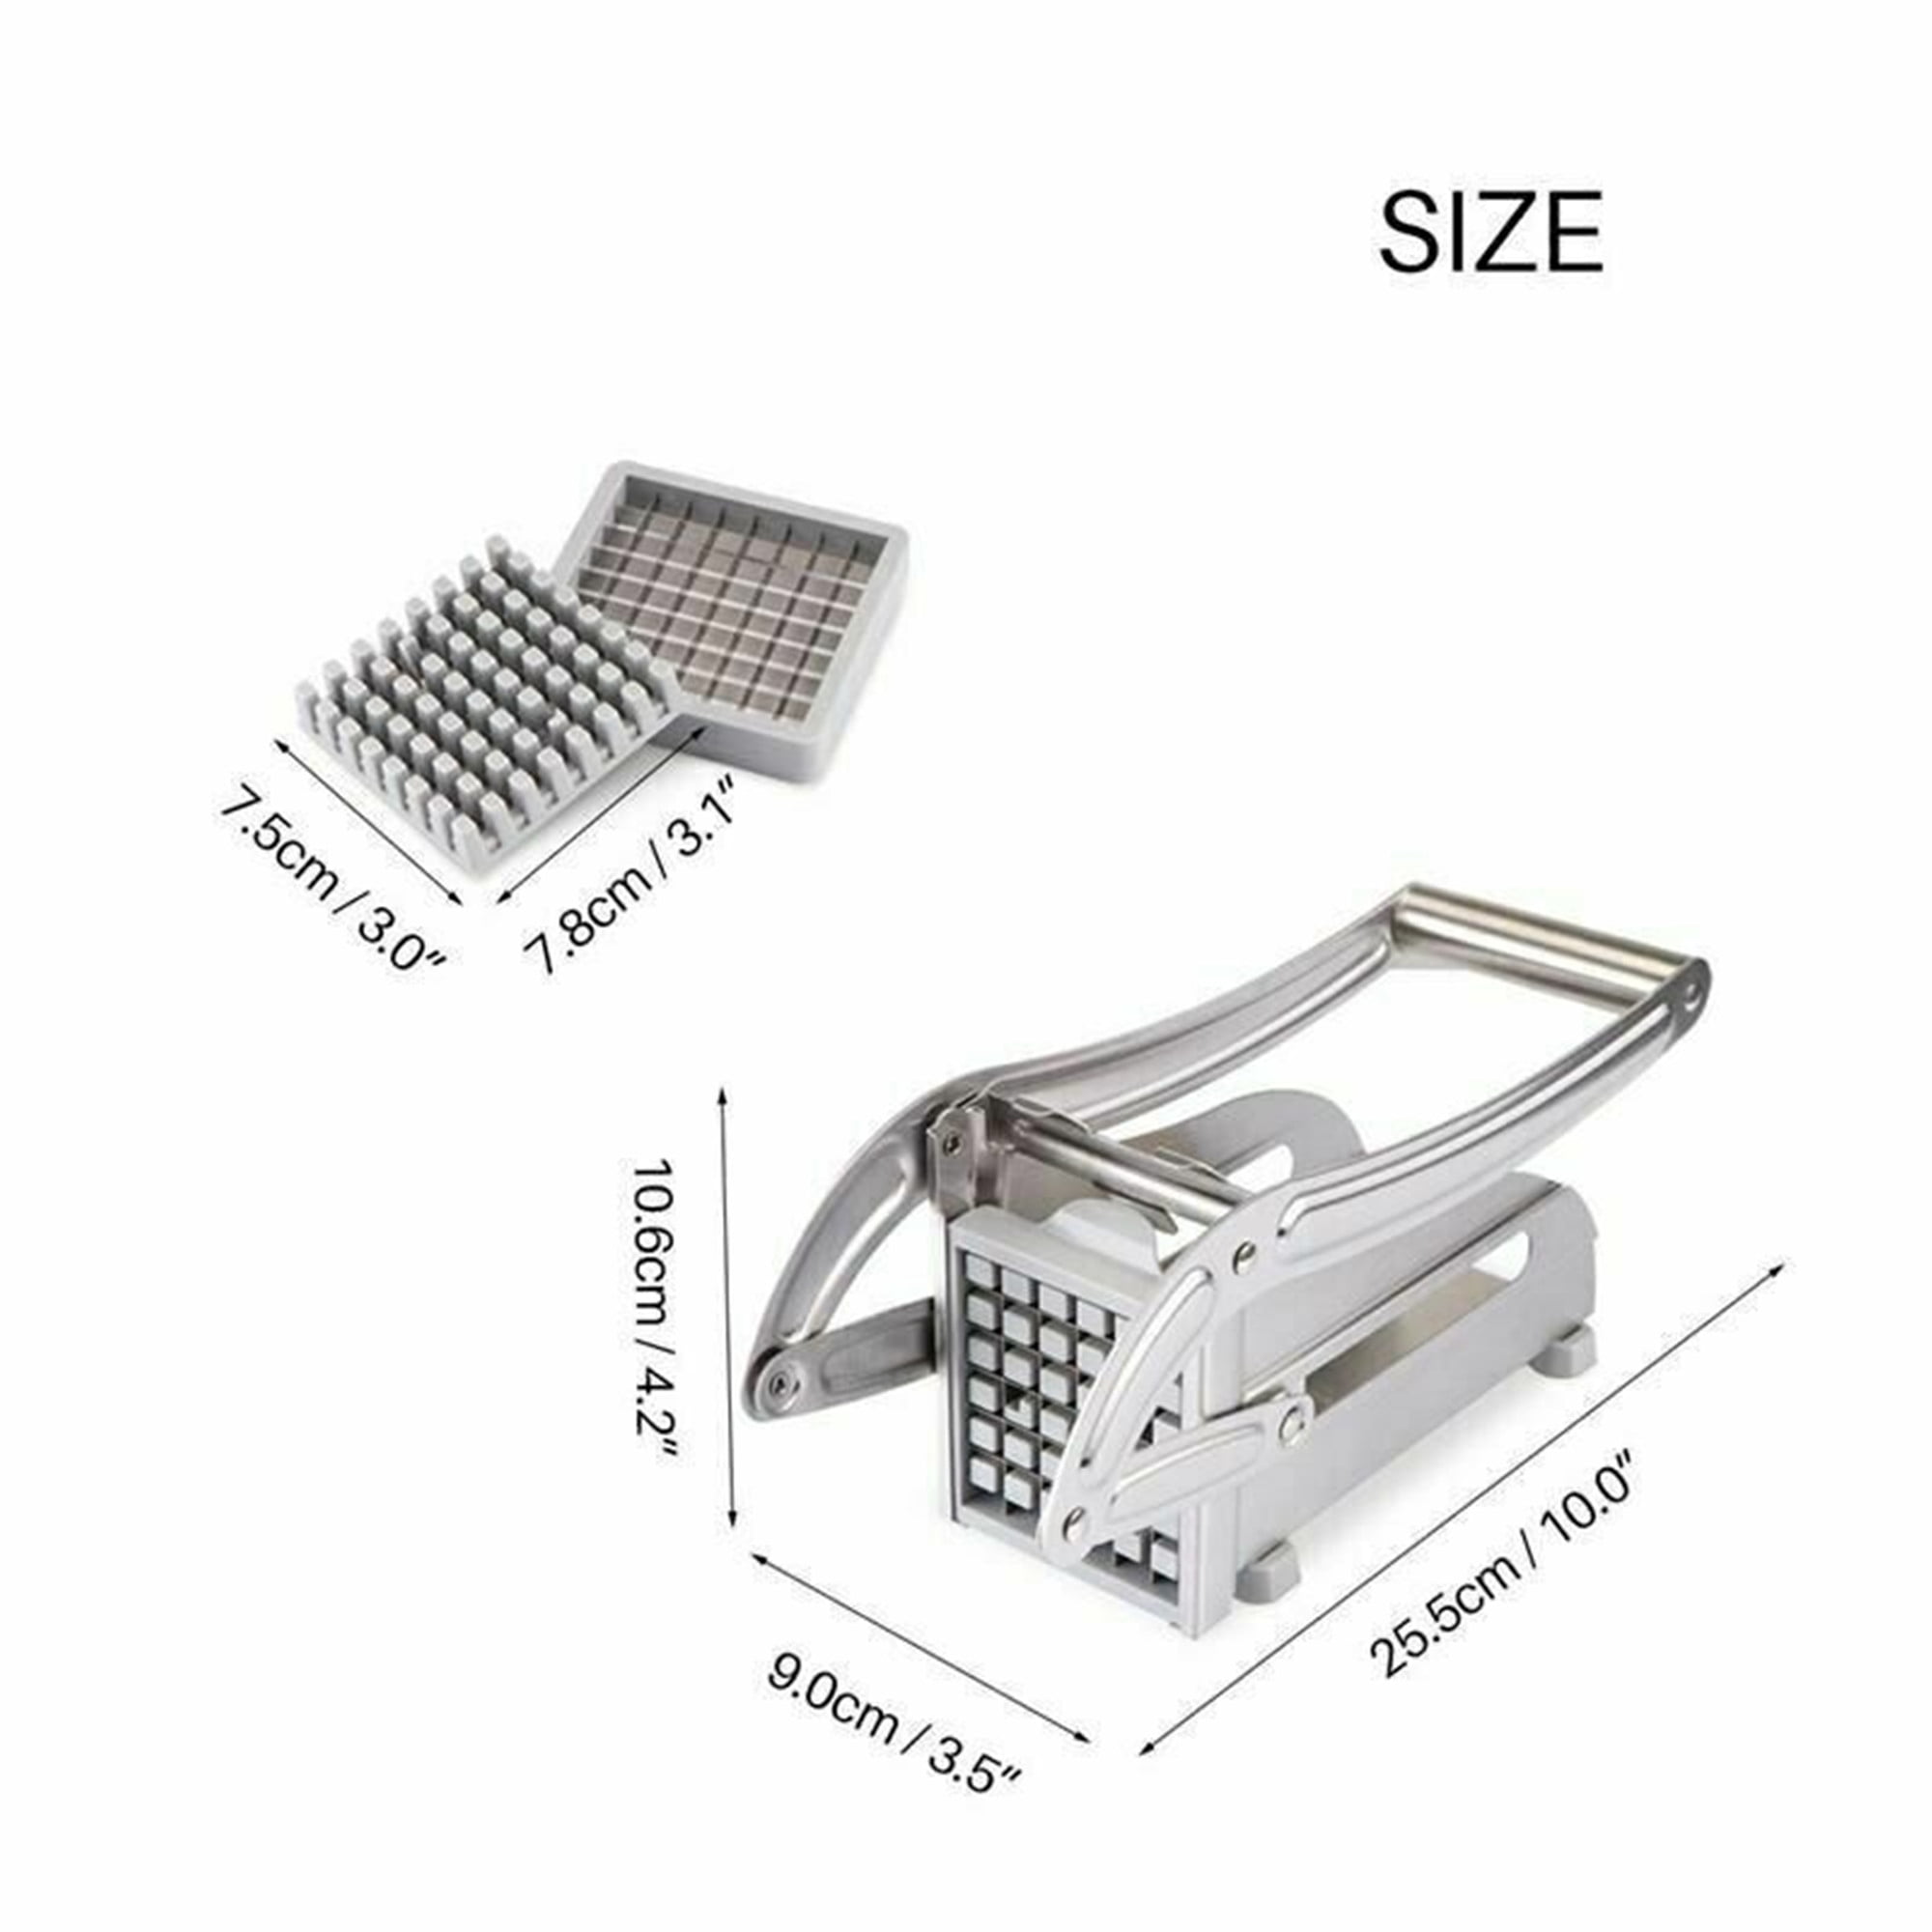 Coma French Fry Cutter with 2 Blades, Professional Potato Cutter Stainless Steel, Potato Slicer French Fries, Press French Fries Cutter for Potato